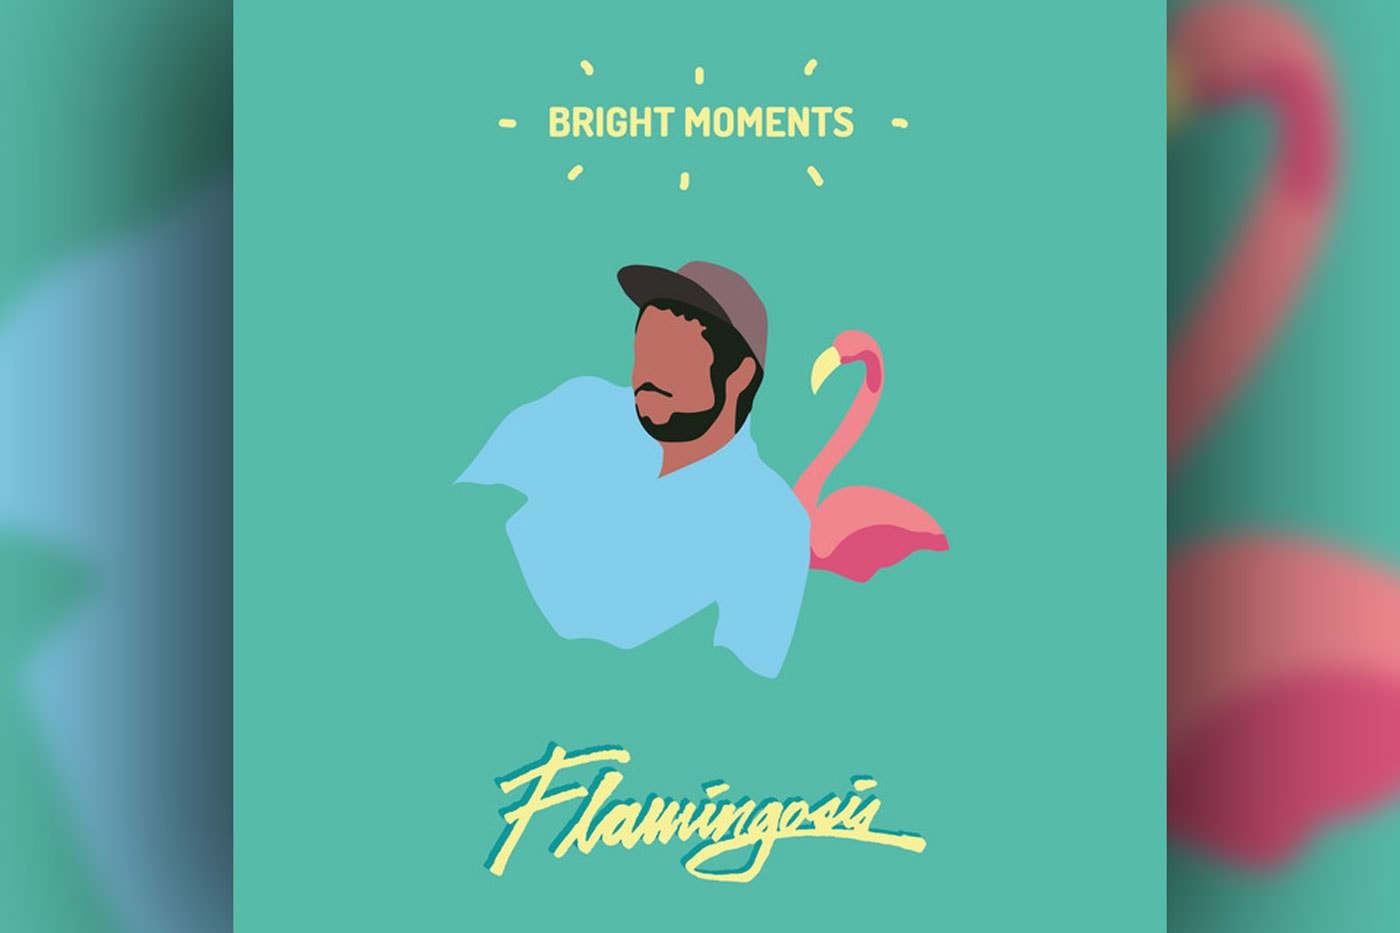 Flamingosis Flawlessly Fuses Hip-Hop & Funk on 'Bright Moments'